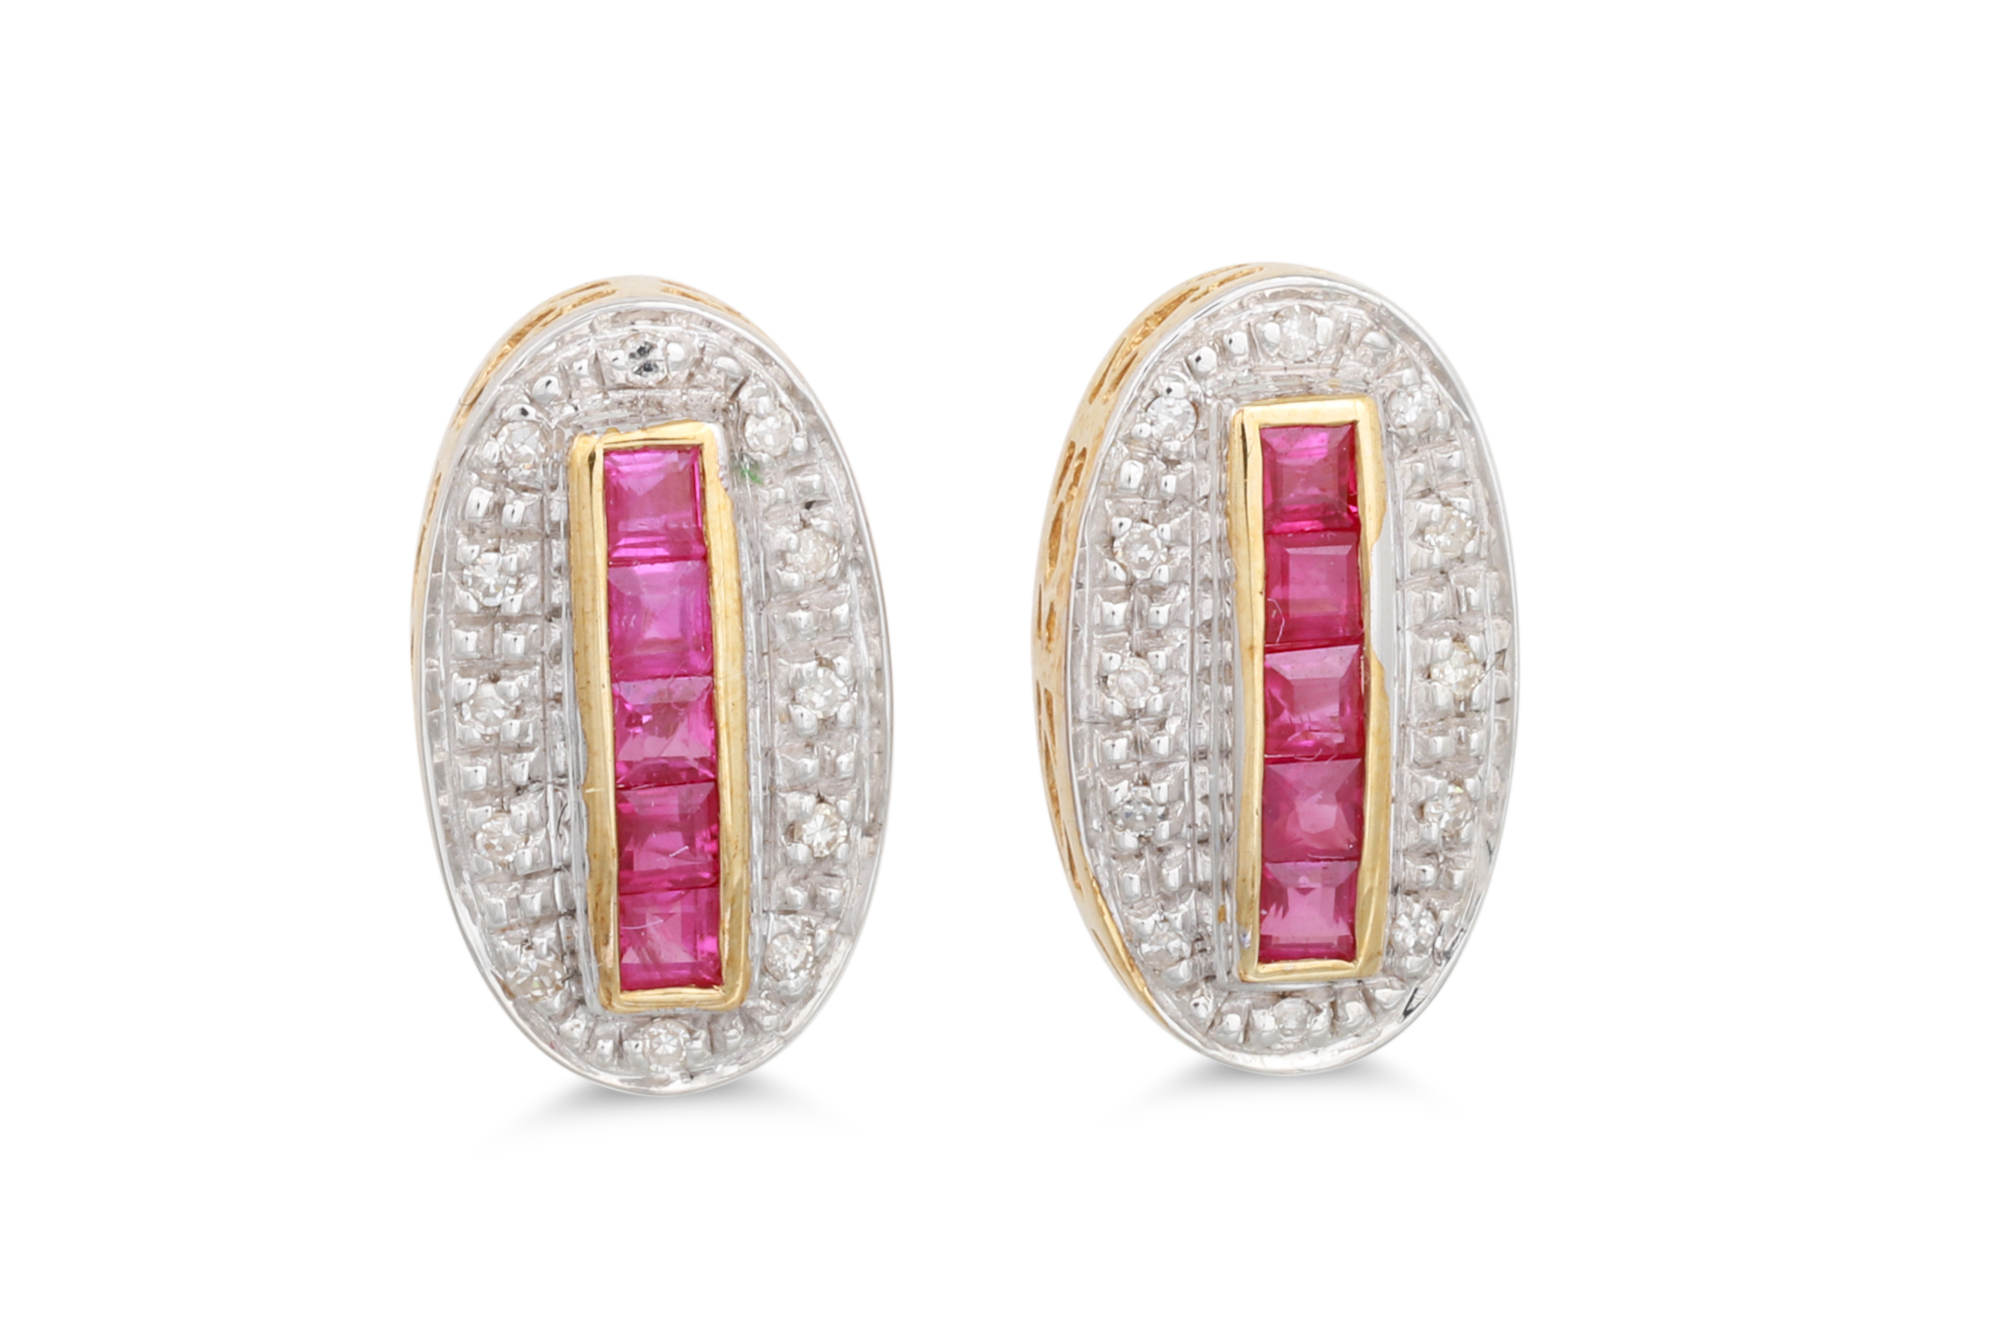 A PAIR OF DIAMOND AND RUBY EARRINGS, mounted in gold